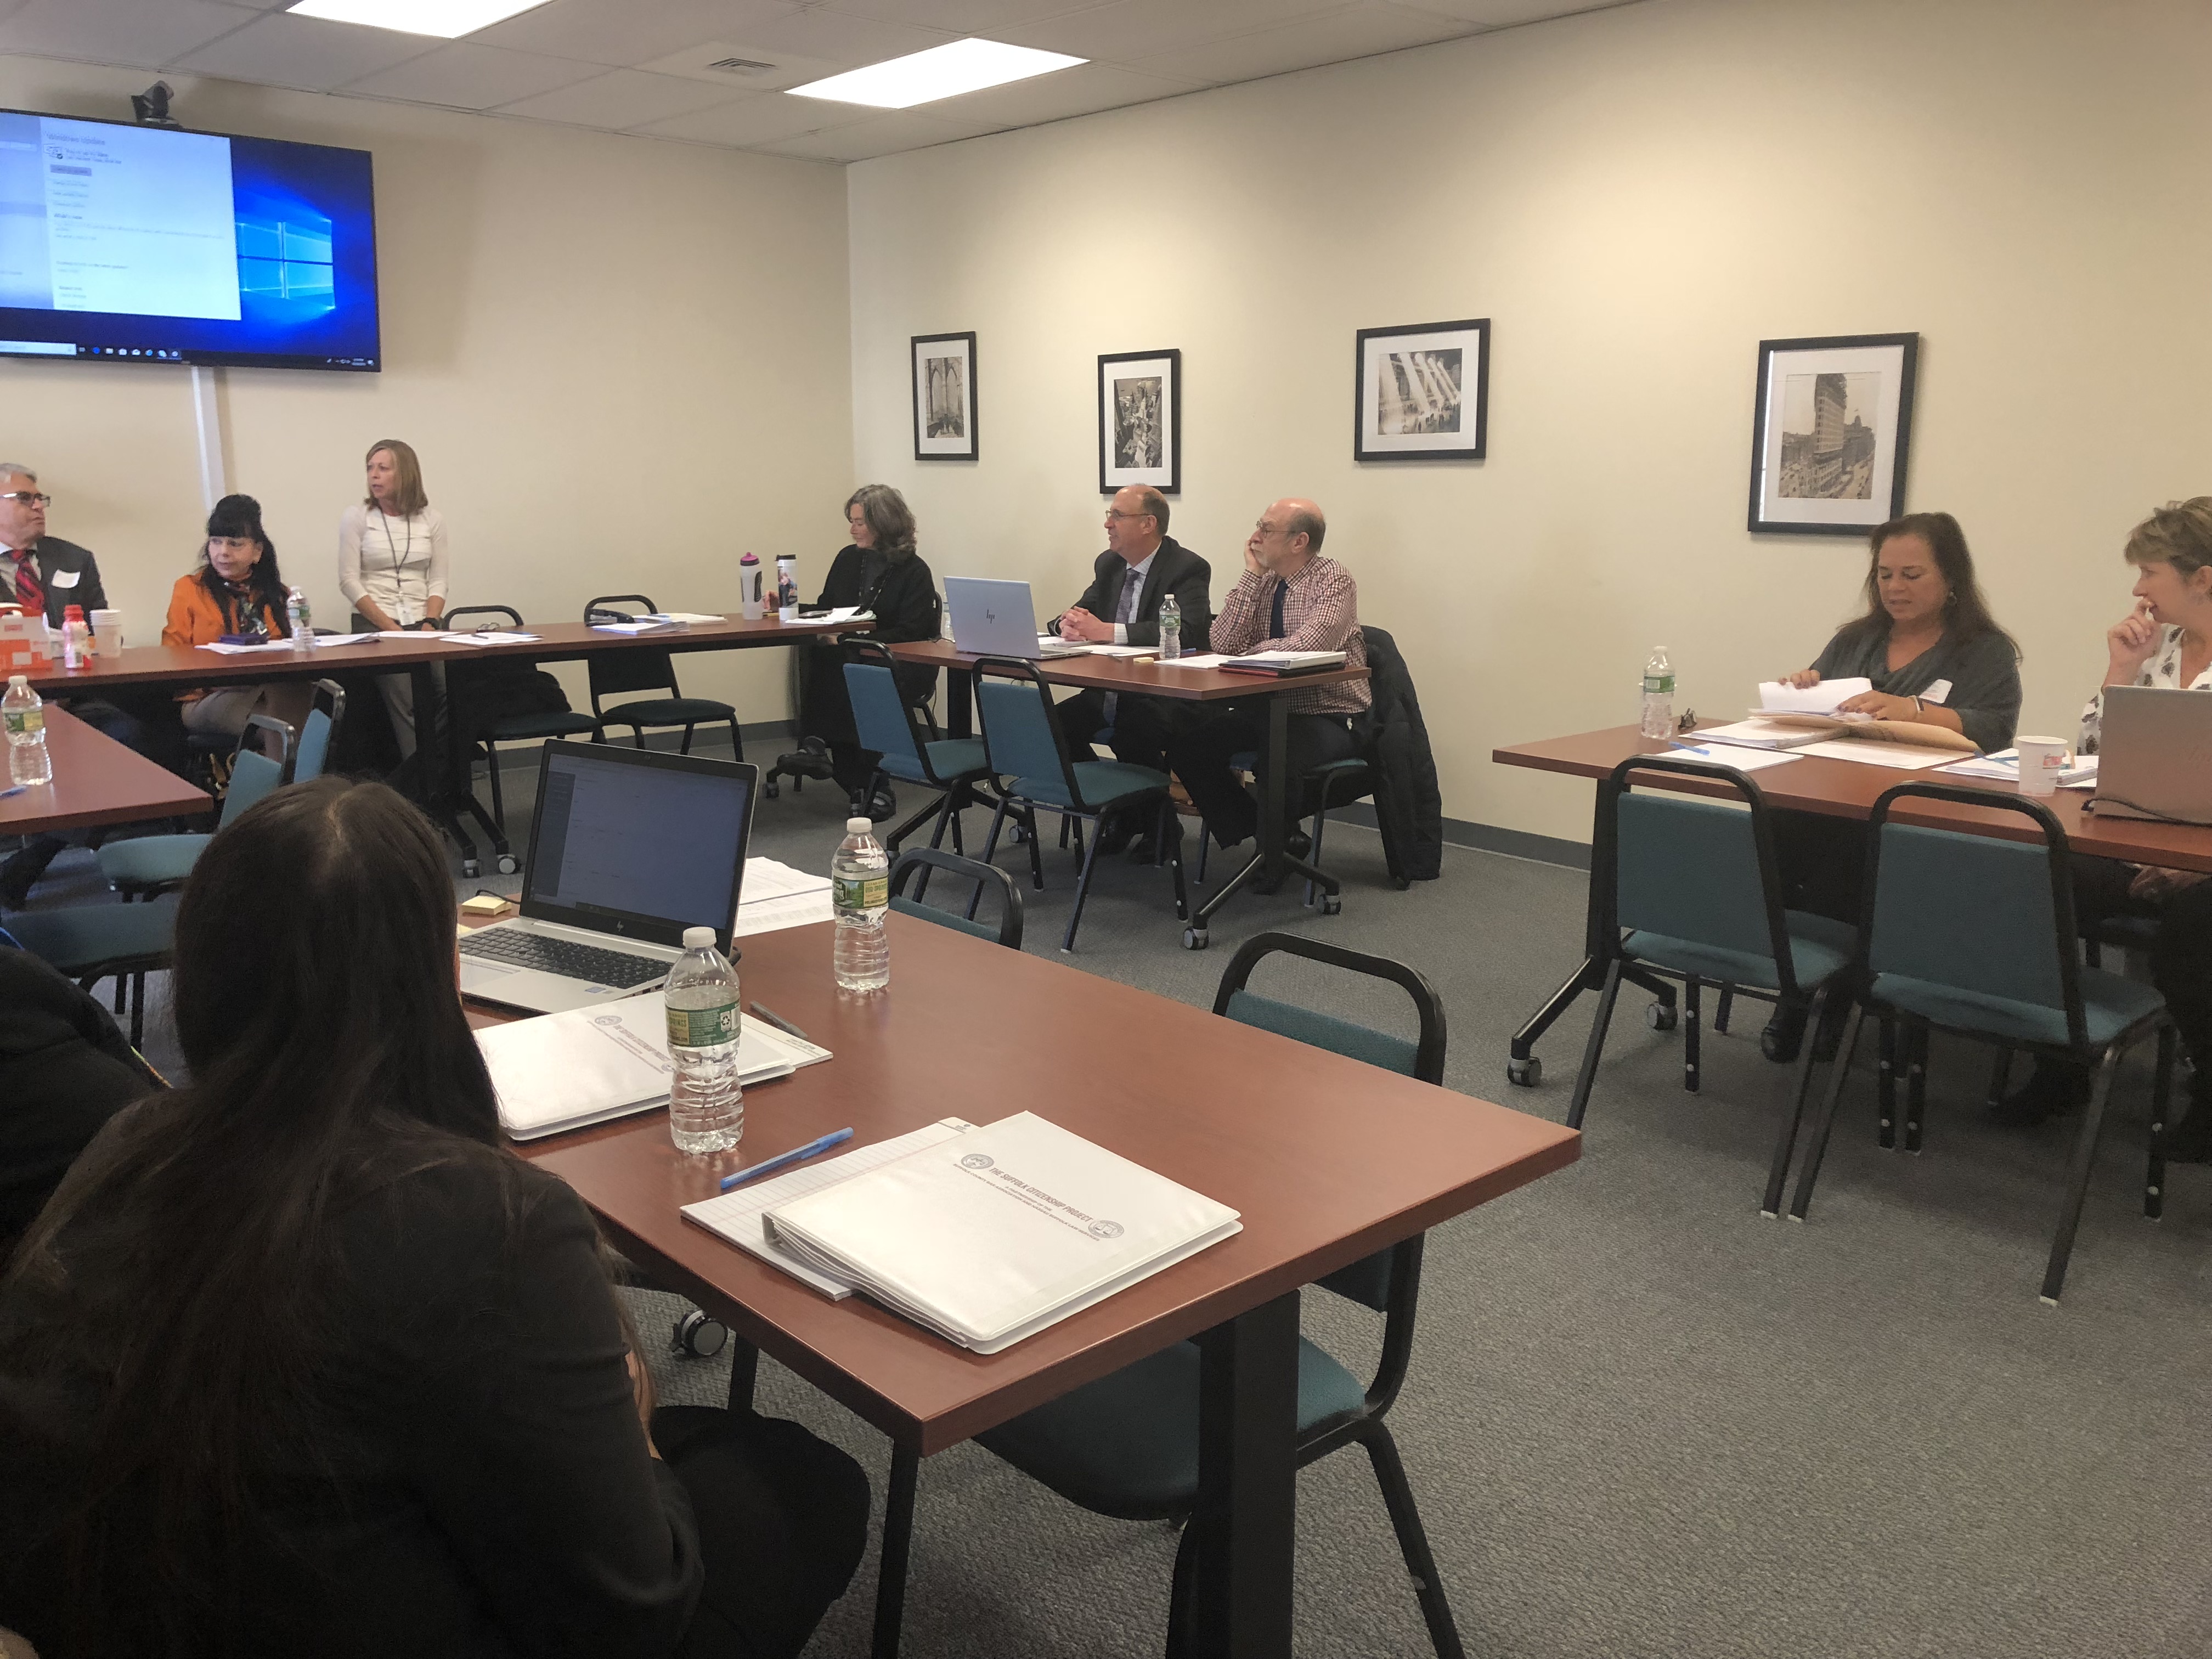 Our first Pro Bono Citizenship Clinic, held on October 30, 2018, was a great success!